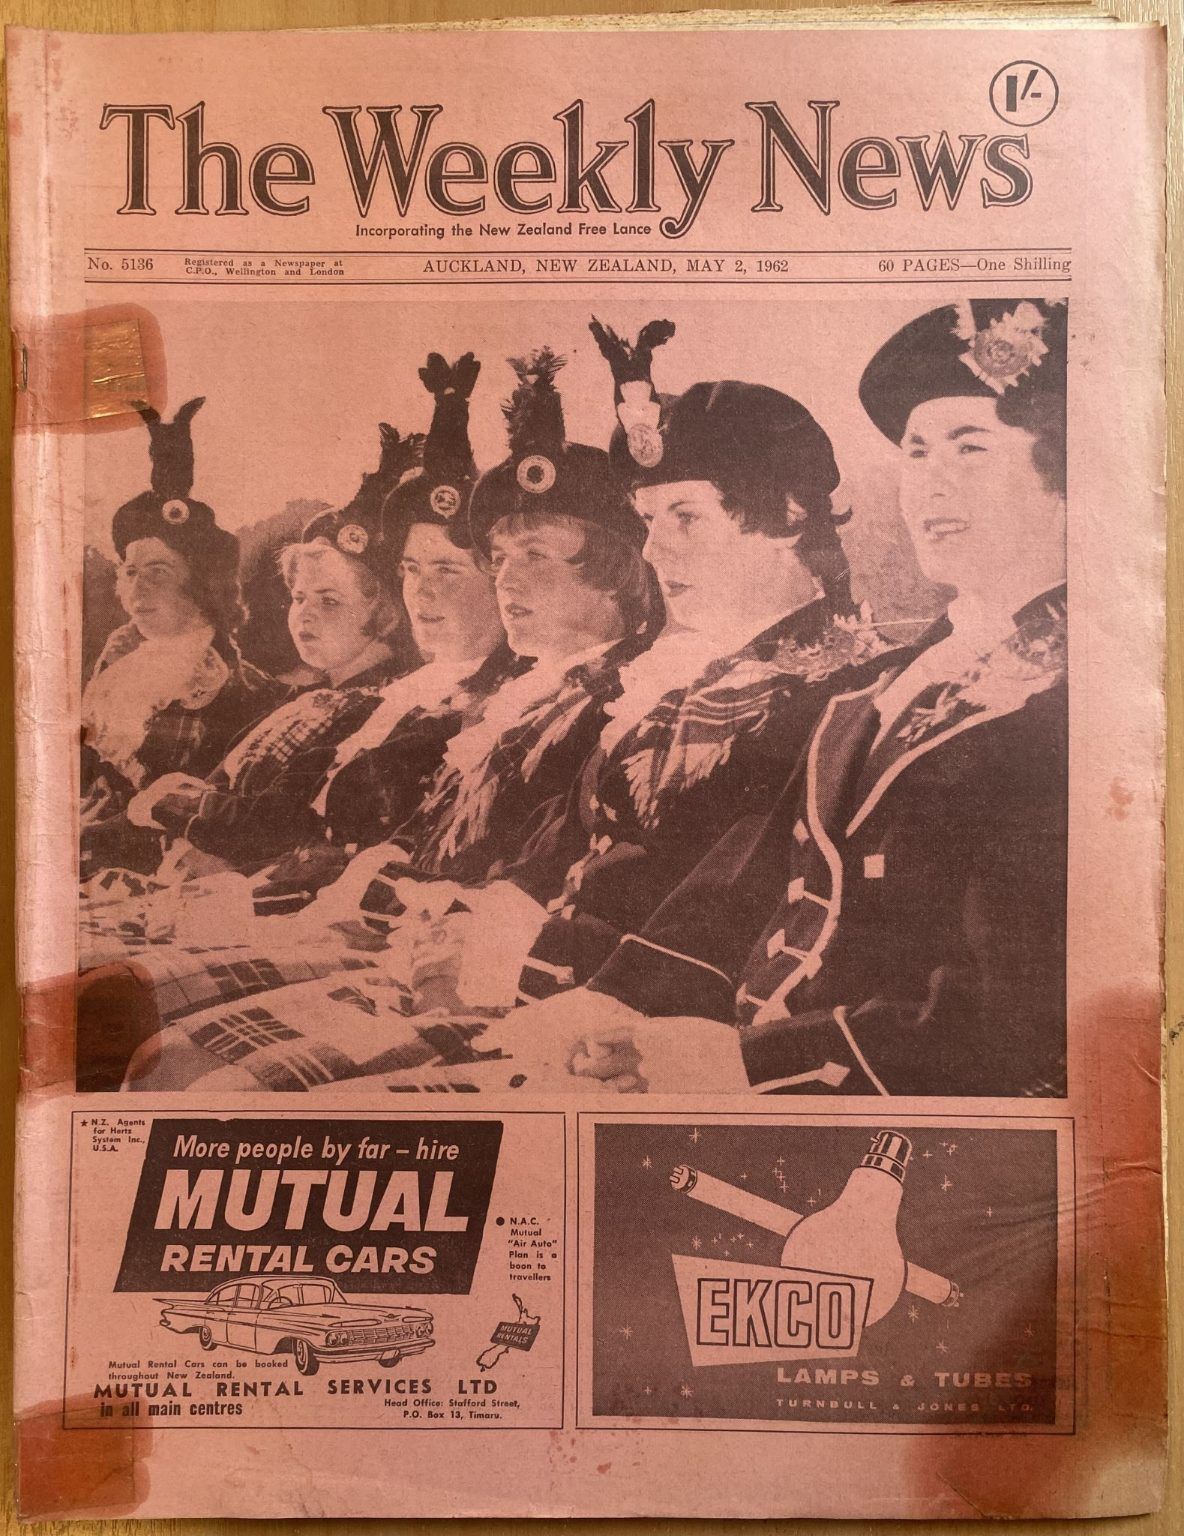 OLD NEWSPAPER: The Weekly News, No. 5136, 2 May 1962